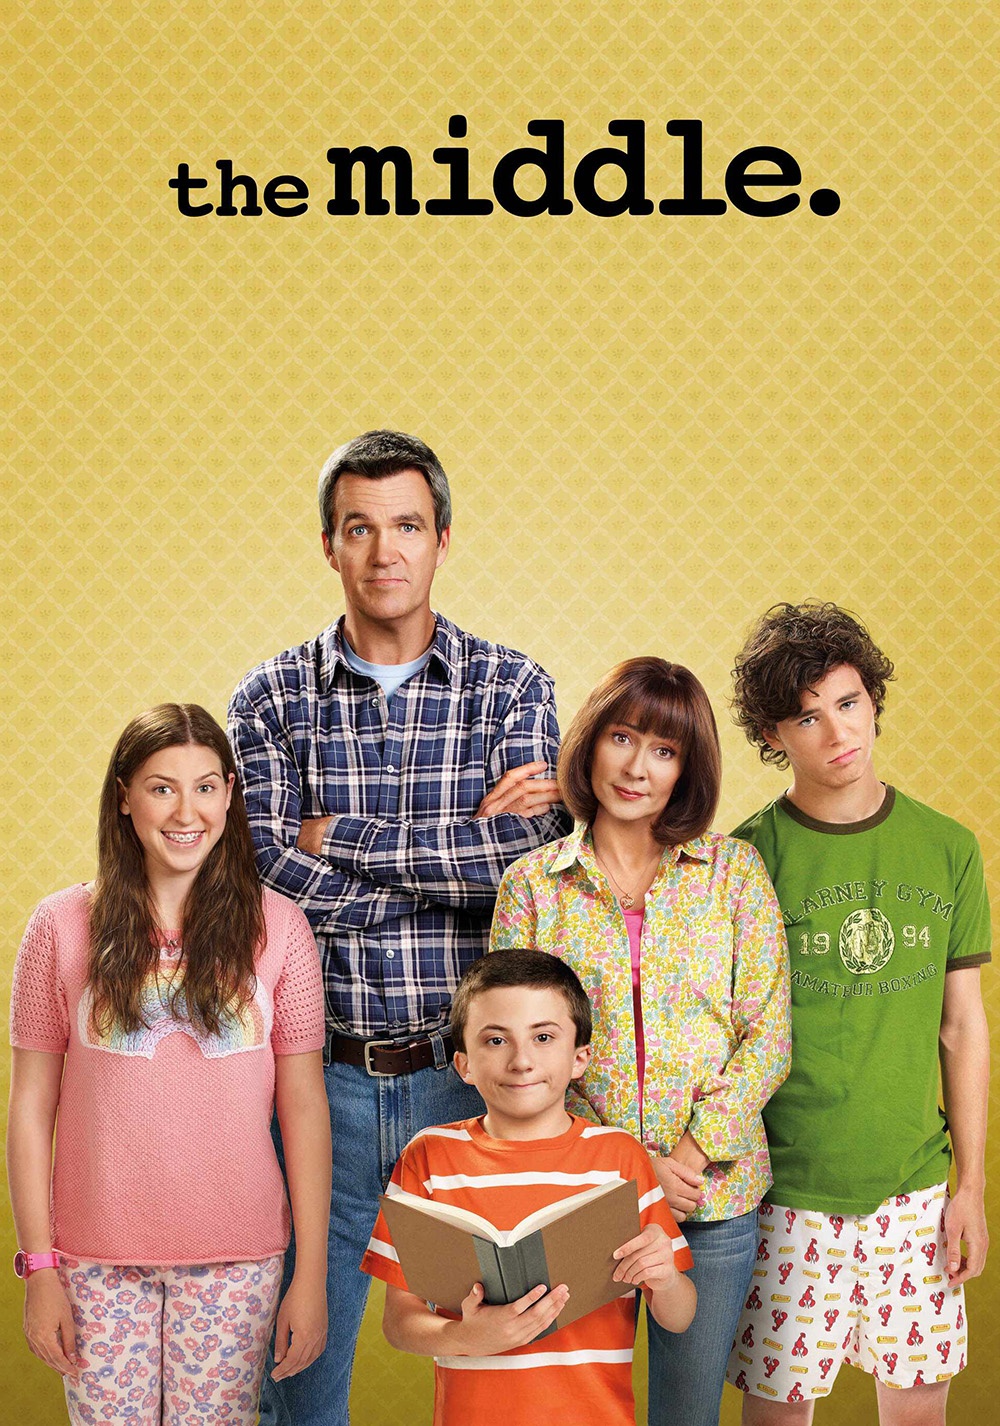 Why American Sitcom “The Middle” is One of the Best Family Comedies Ever 1